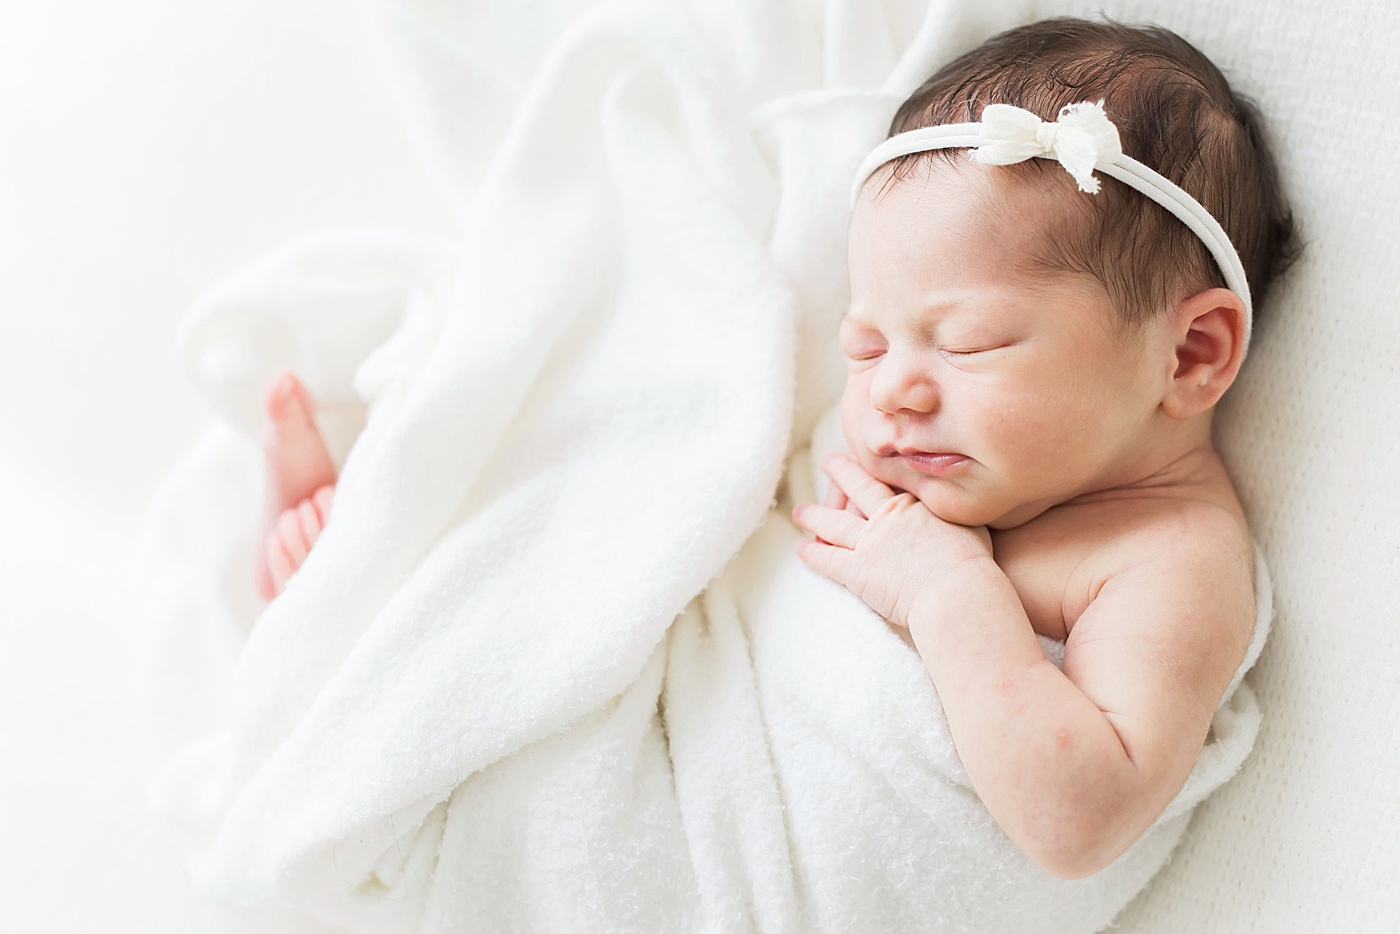 Baby girl curled up for newborn photos. Photo by Fresh Light Photography.